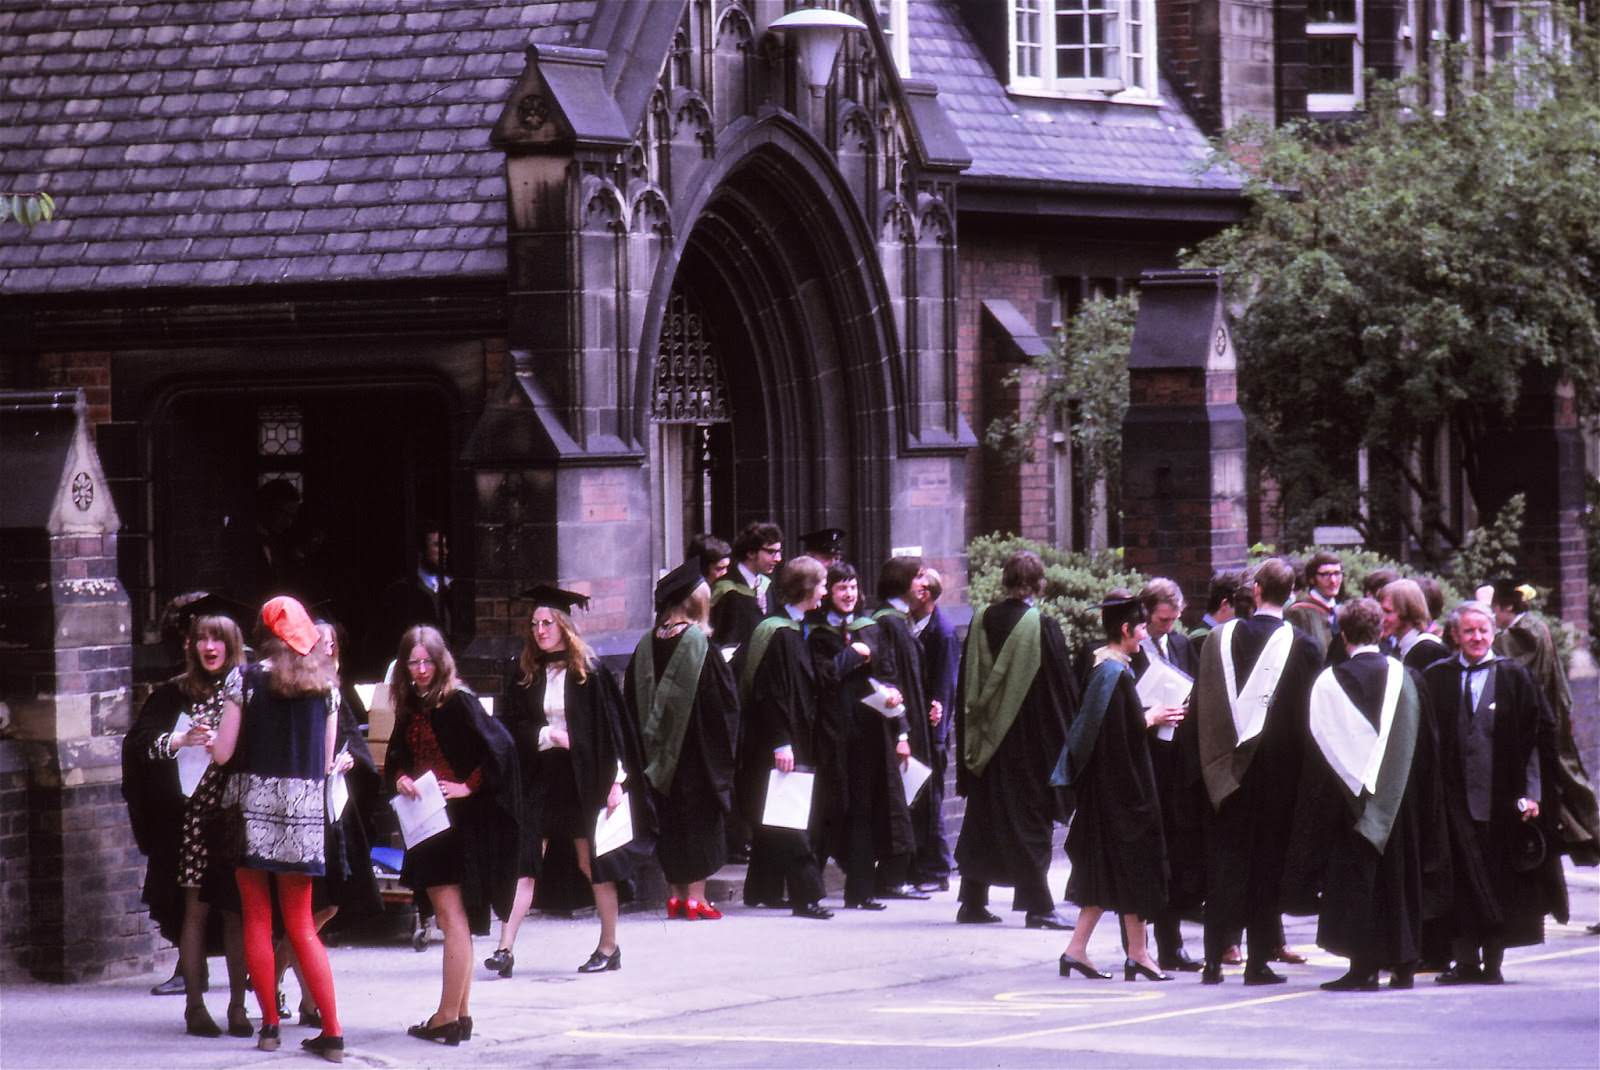 Graduation Day 1973 - entrance to the Clothworkers' Court.